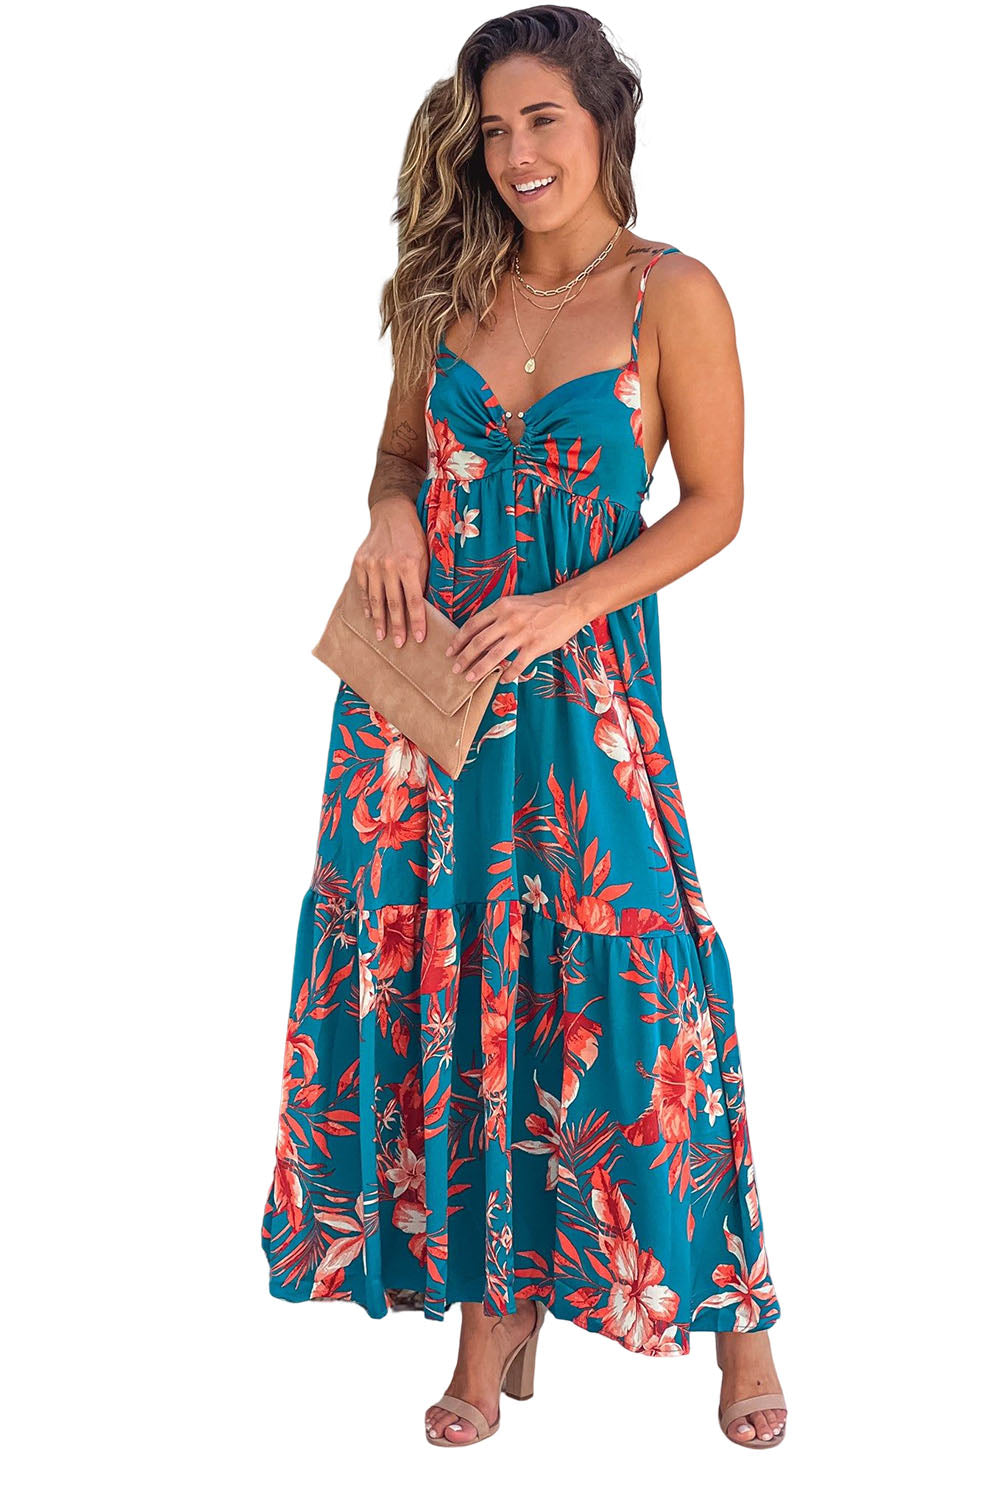 Cali Chic Sky Blue Strappy Open Back Floral Maxi Dress